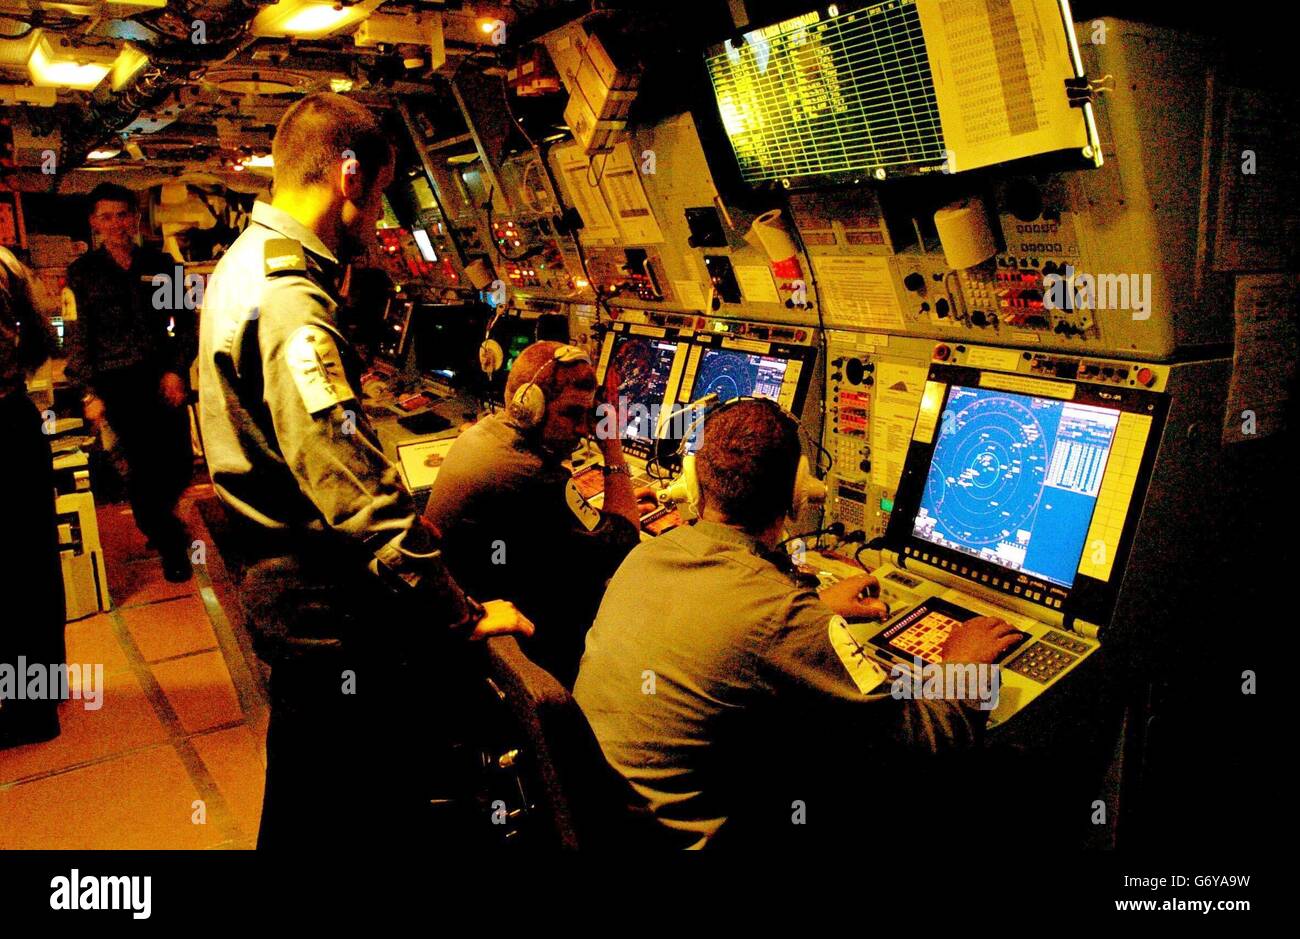 Crew members study radar instruments in the HMS Grafton's Operations Room. The Portsmouth-based Type 23 Frigate is currently patrolling the waters off the coast of Iraq. Stock Photo